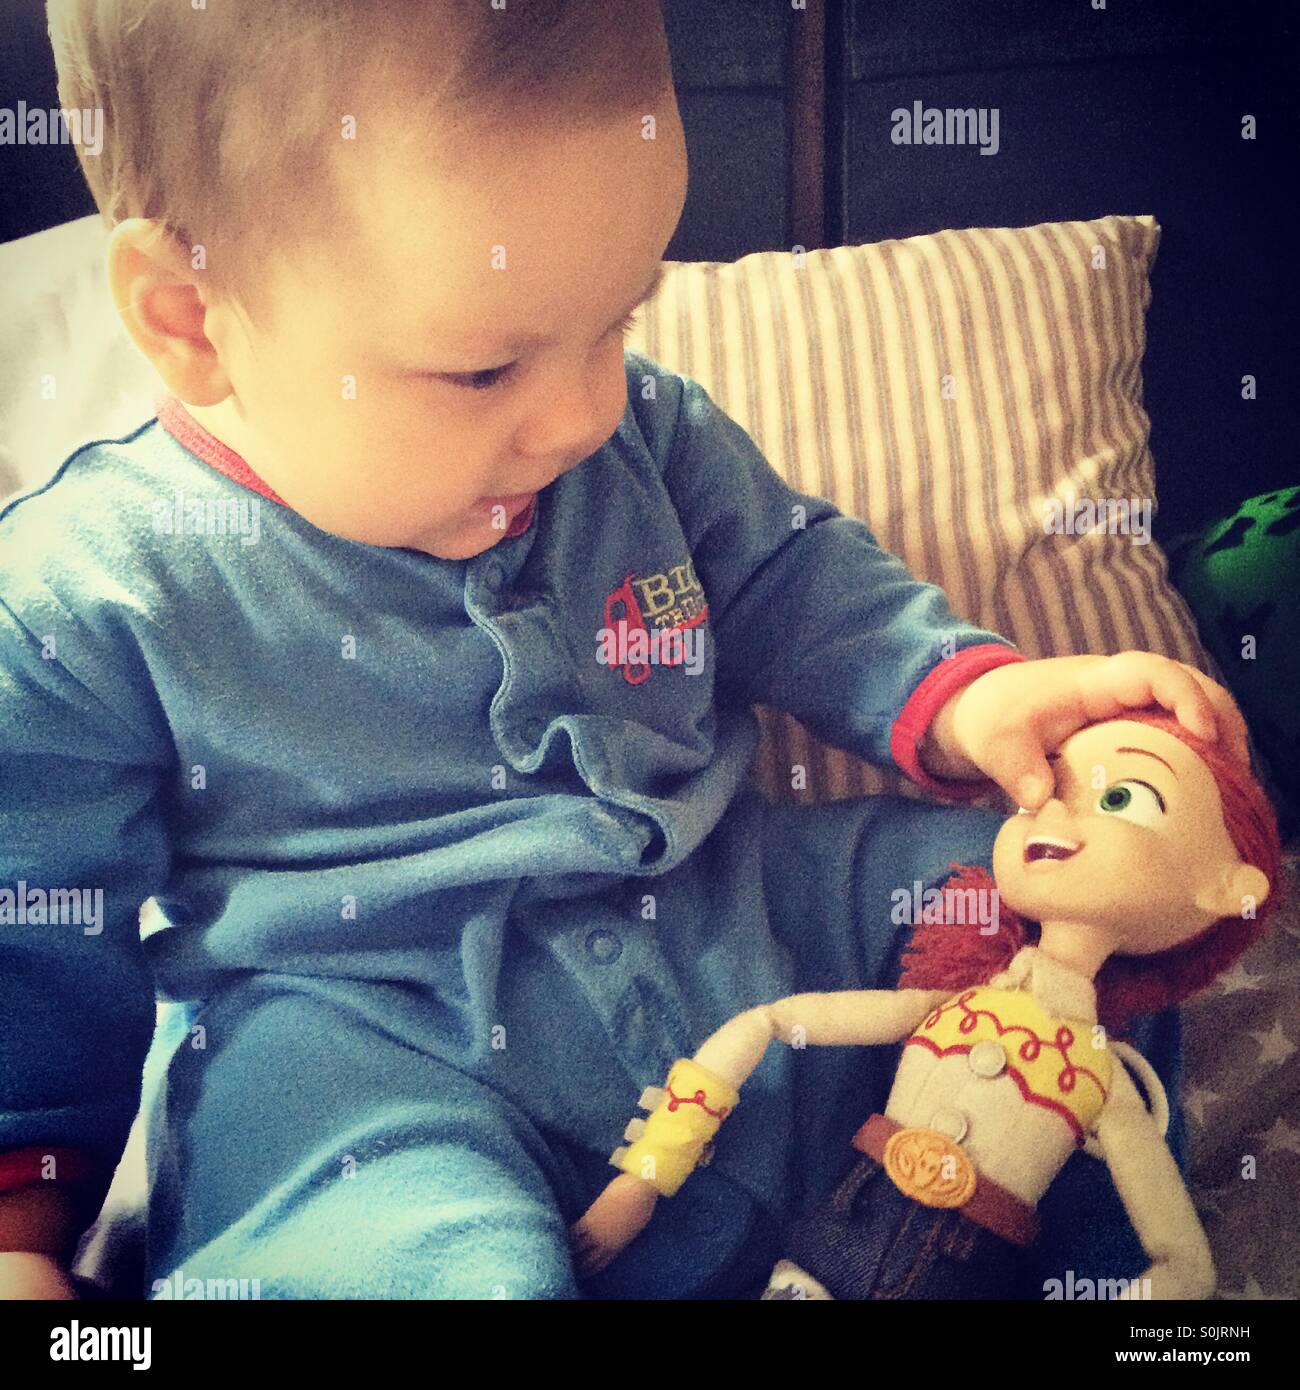 Baby boy wearing blue pajamas is sitting on a blanket with pillows at the back and is playing with his sister doll , a character from Toy Story- Jessie . Stock Photo